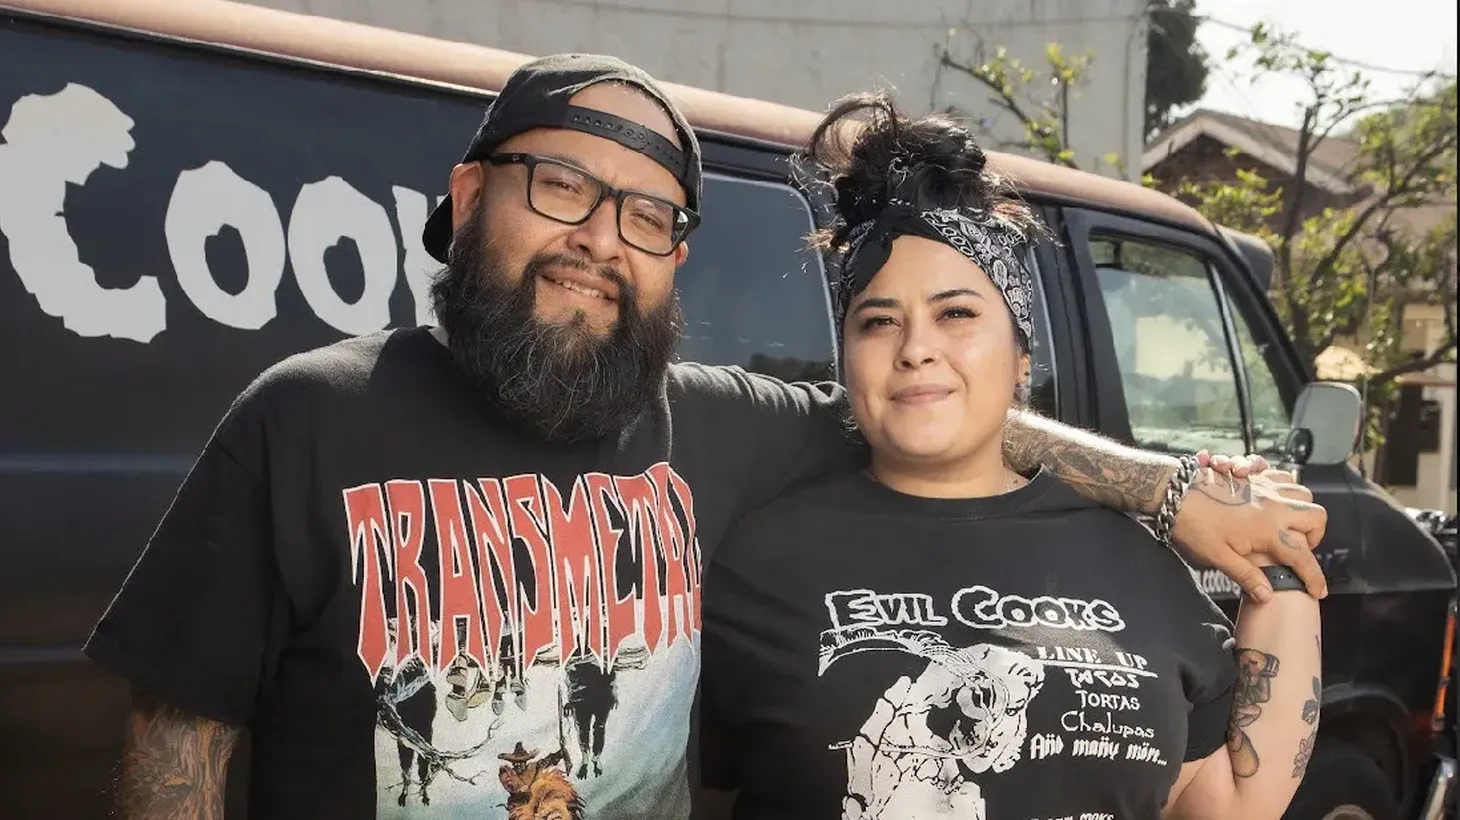 Alex Garcia and Elvia Huerta stand in front of the Evil Cooks van with its distinctive logo.